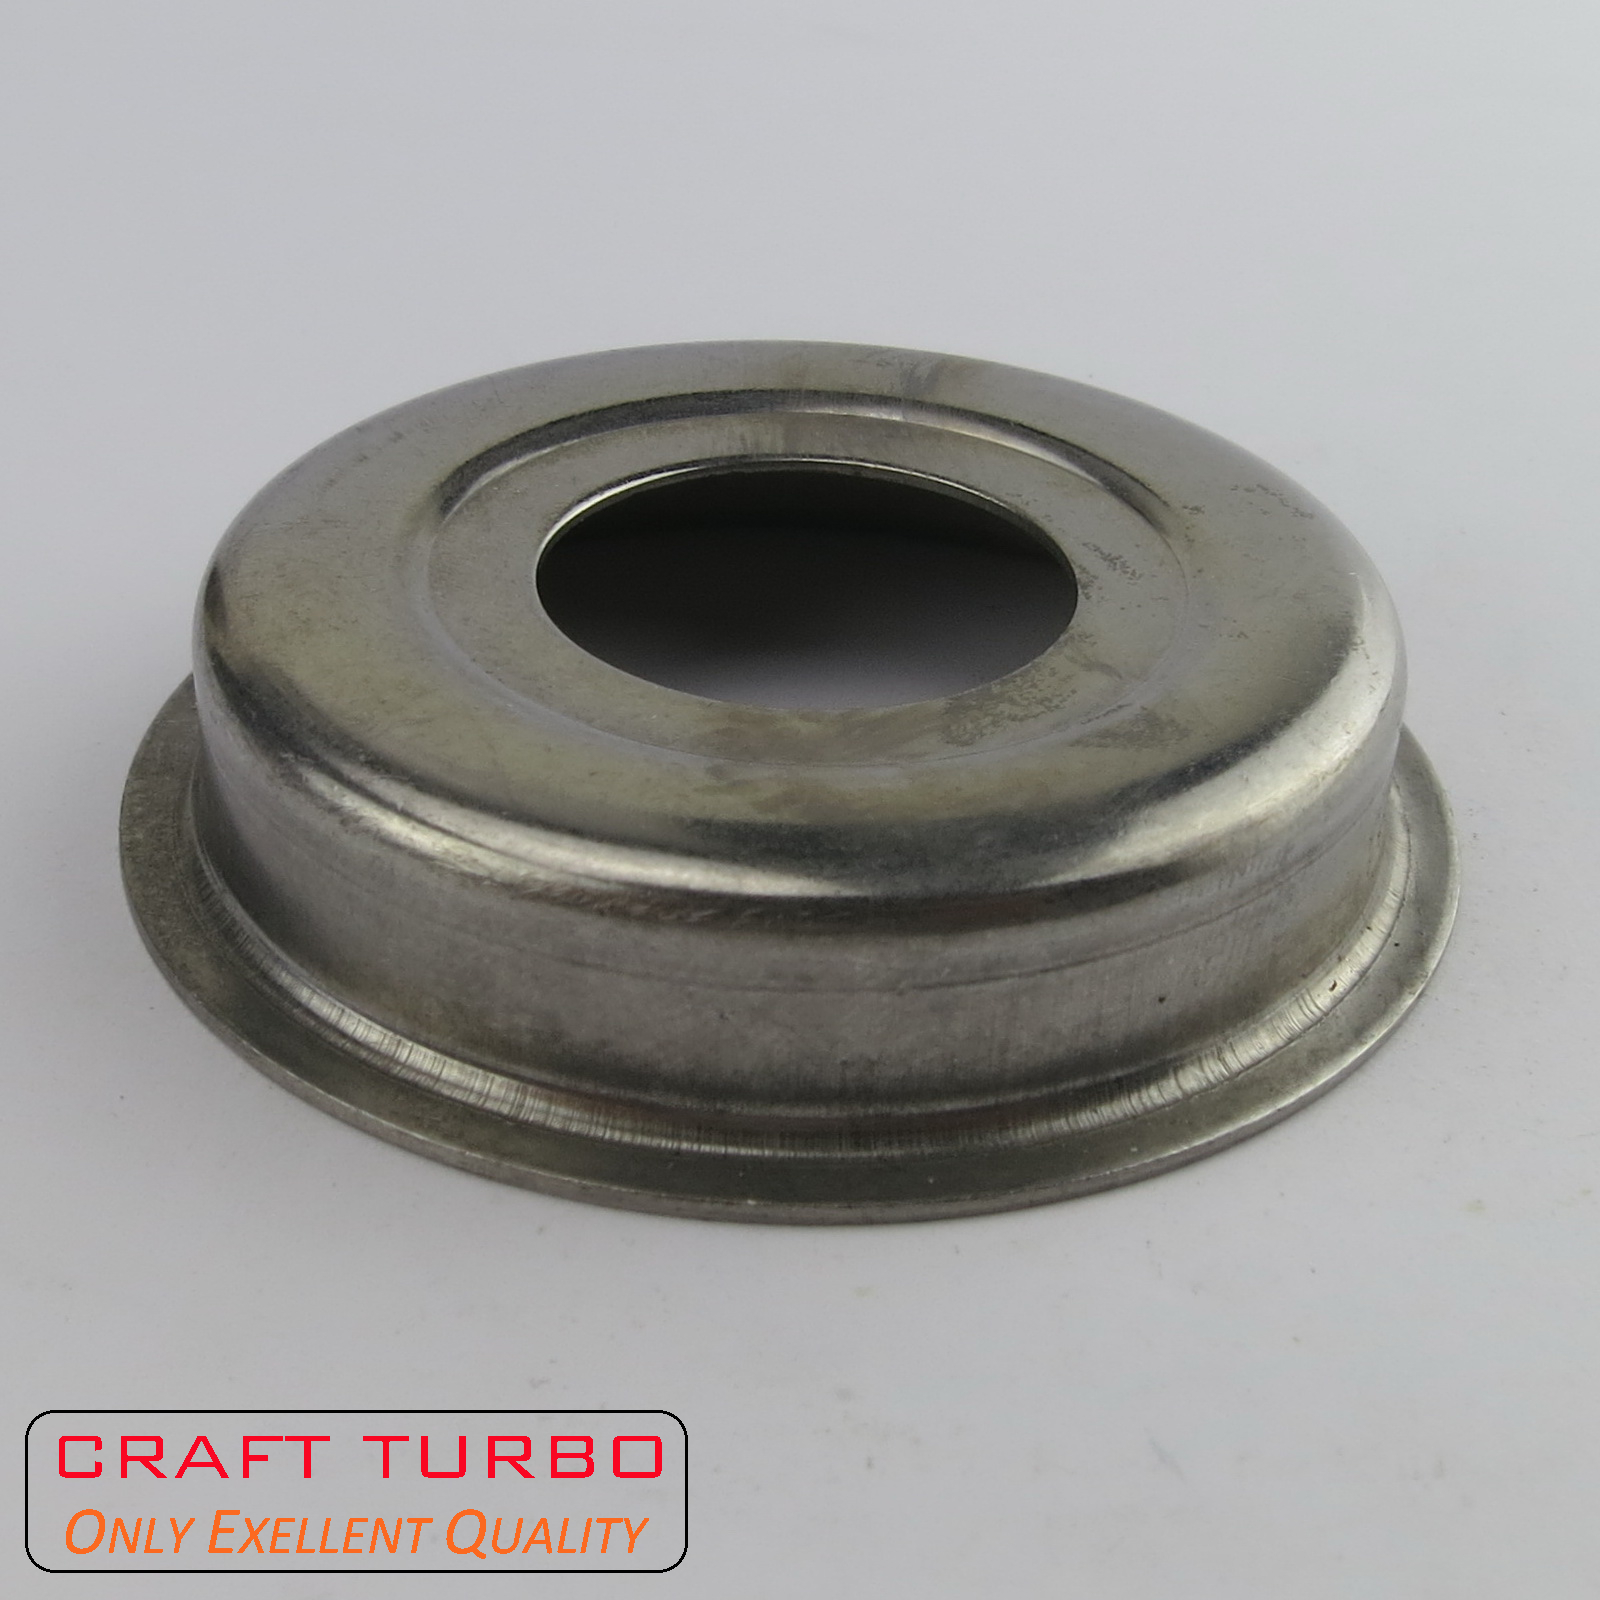 CT12 Heat Shield for Turbocharger 